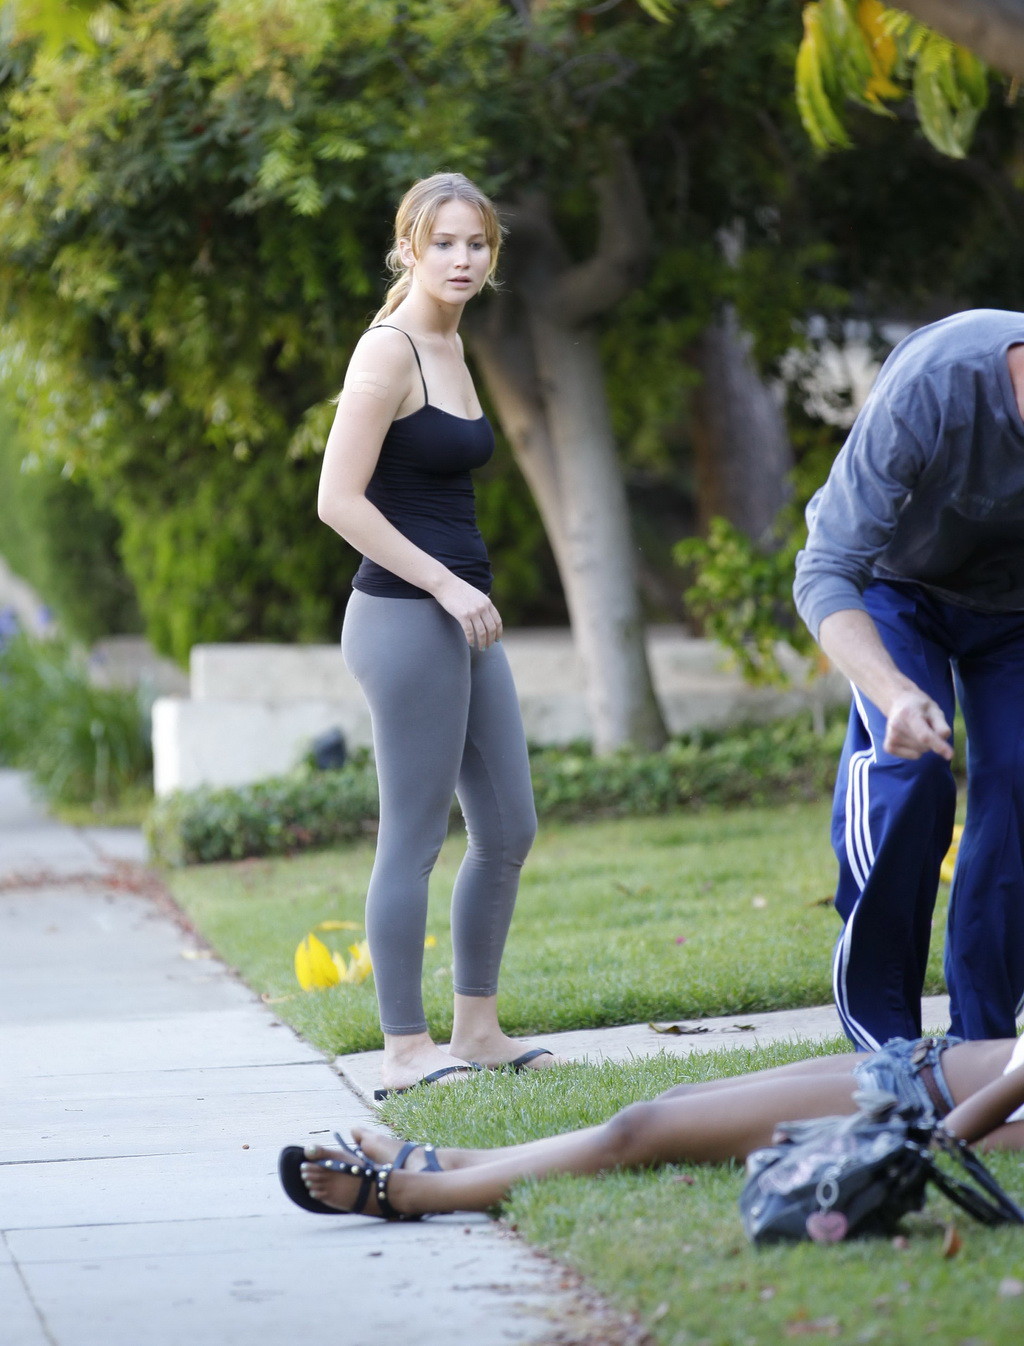 Jennifer Lawrence busty  booty in tights  top in Santa Monica helping a woman wh #75259231